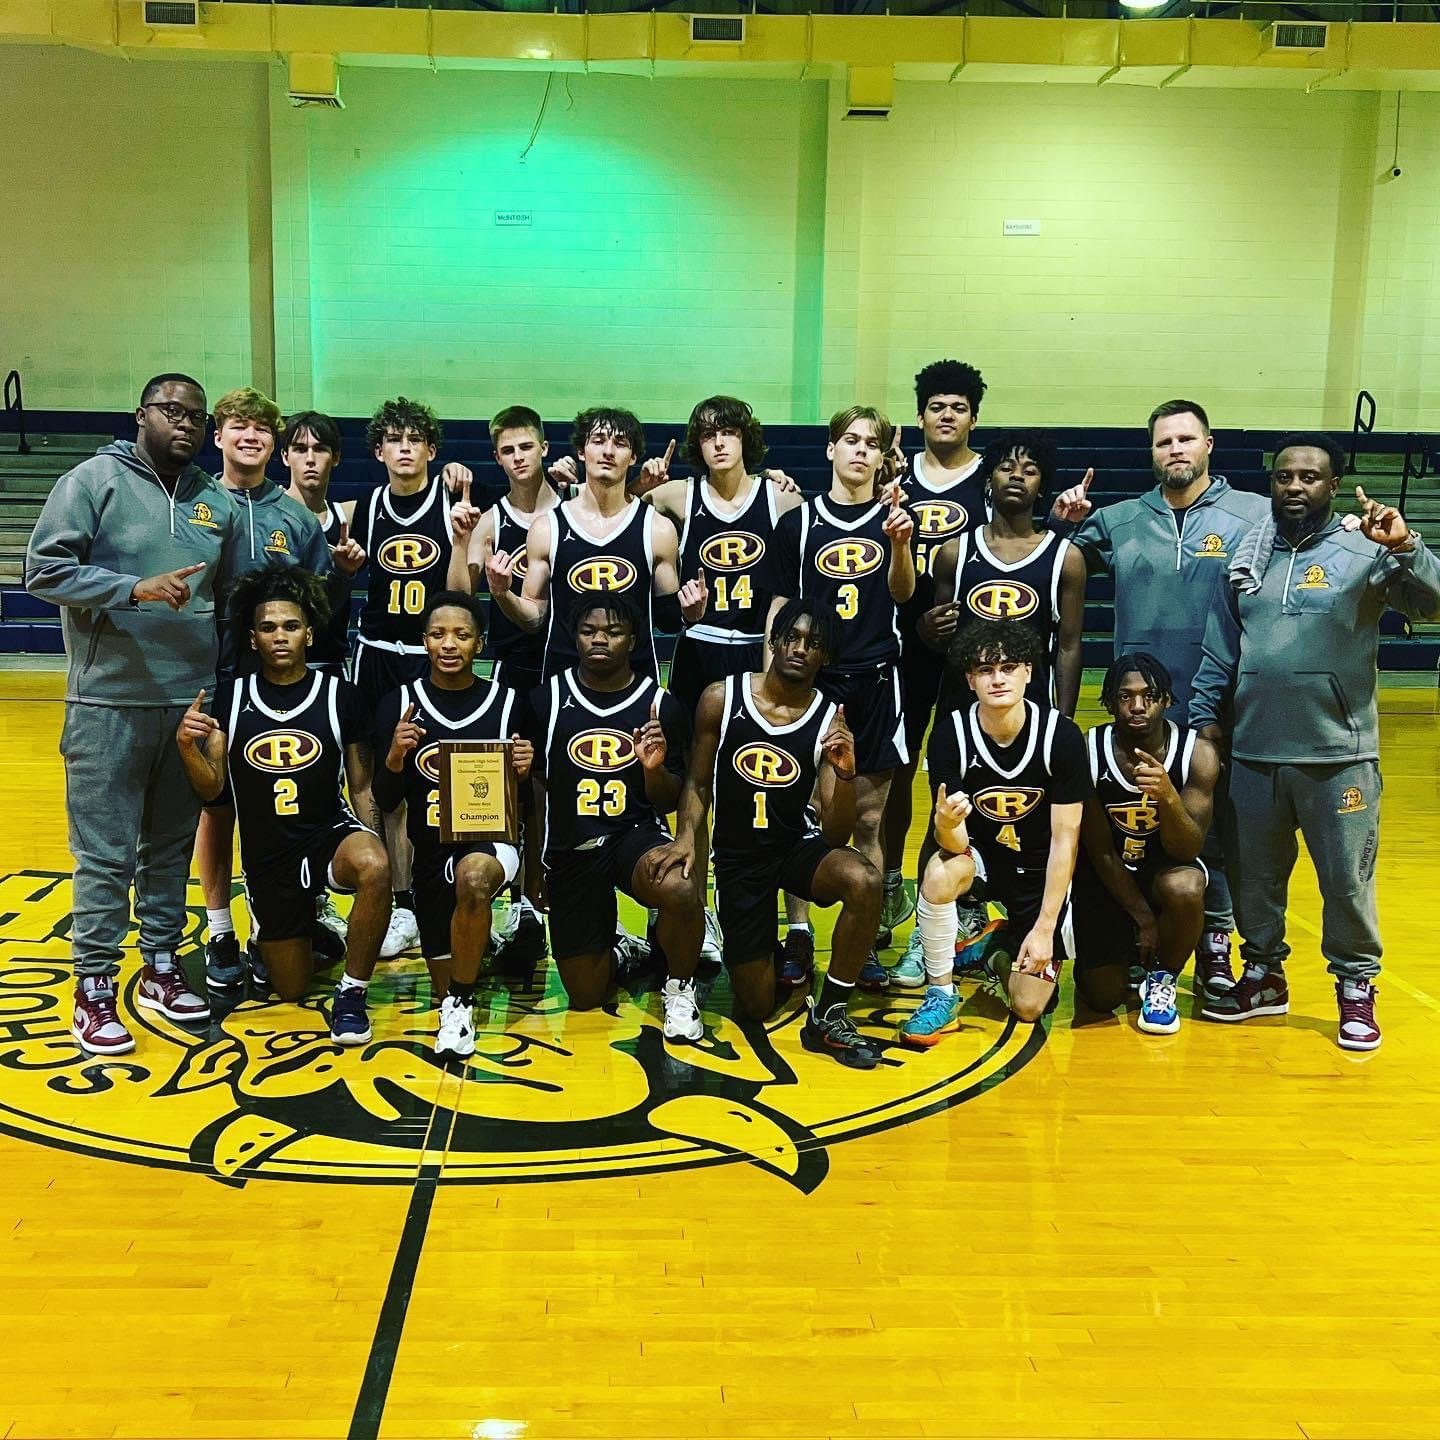 The Robertsdale Golden Bears pose with the McIntosh Christmas Tournament championship plaque after Robertsdale took down St. Luke’s and Alma-Bryant to extend a winning streak to 10 games.